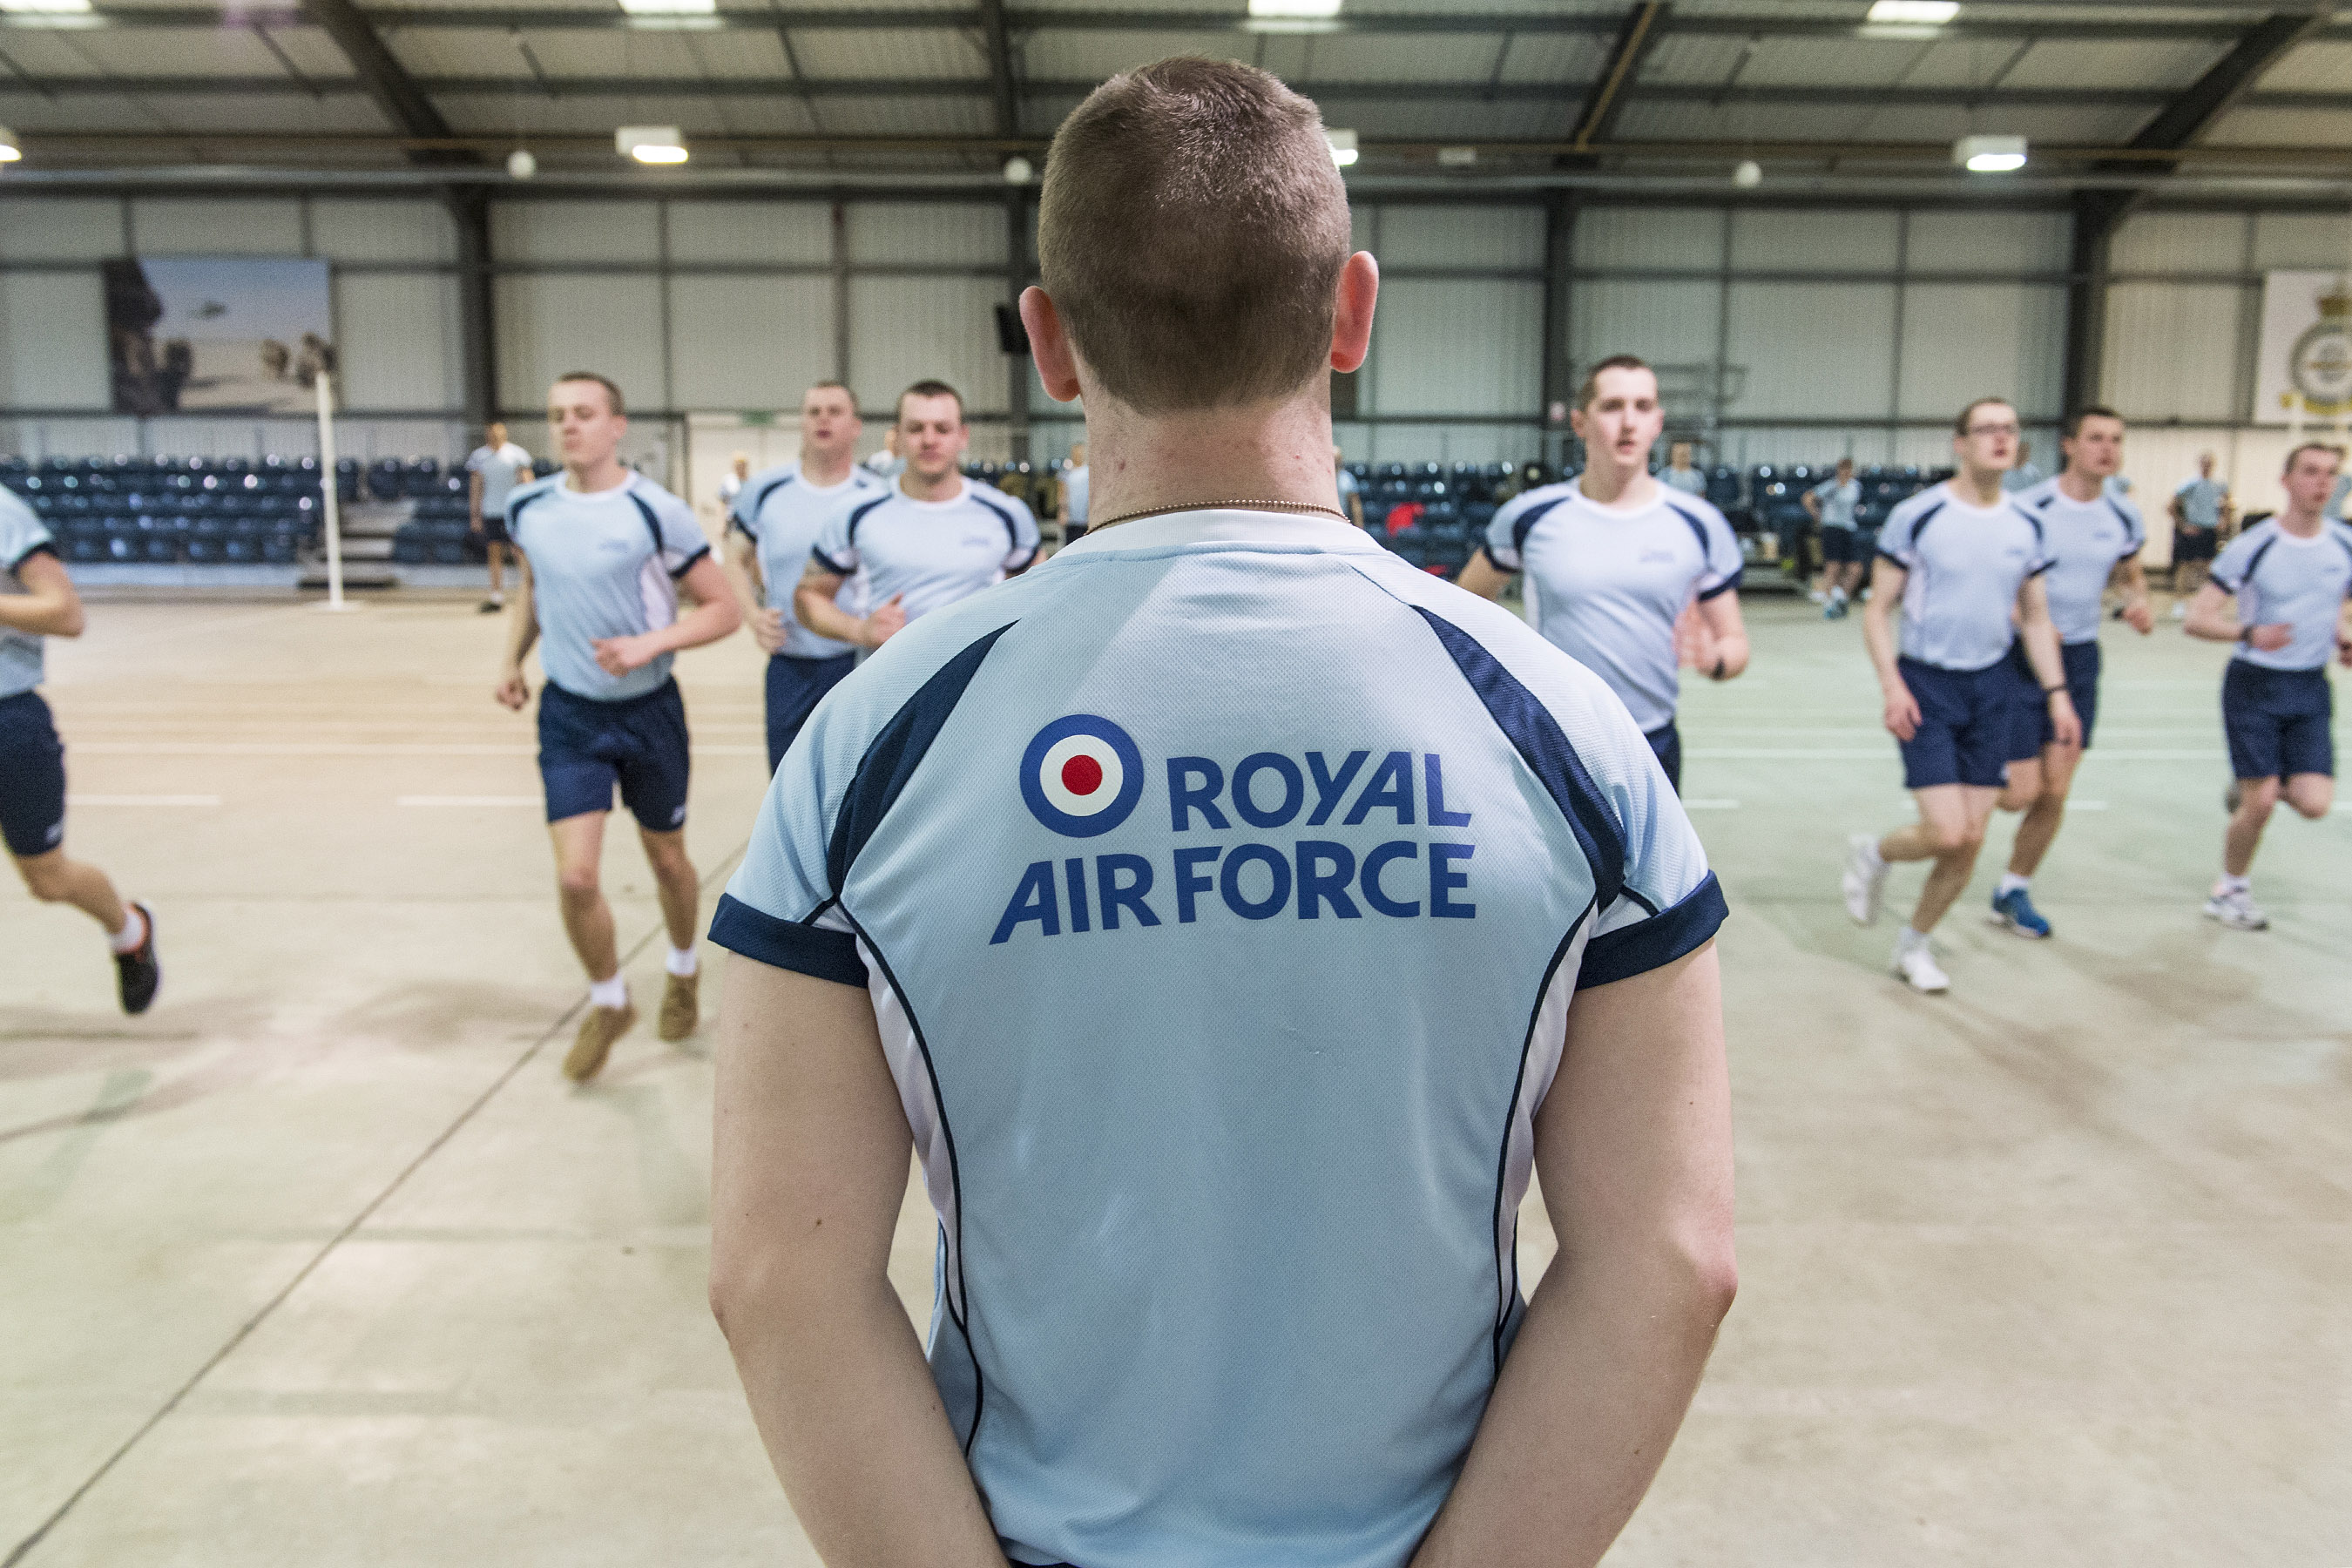 Image shows aviators in the gym during a fitness test.